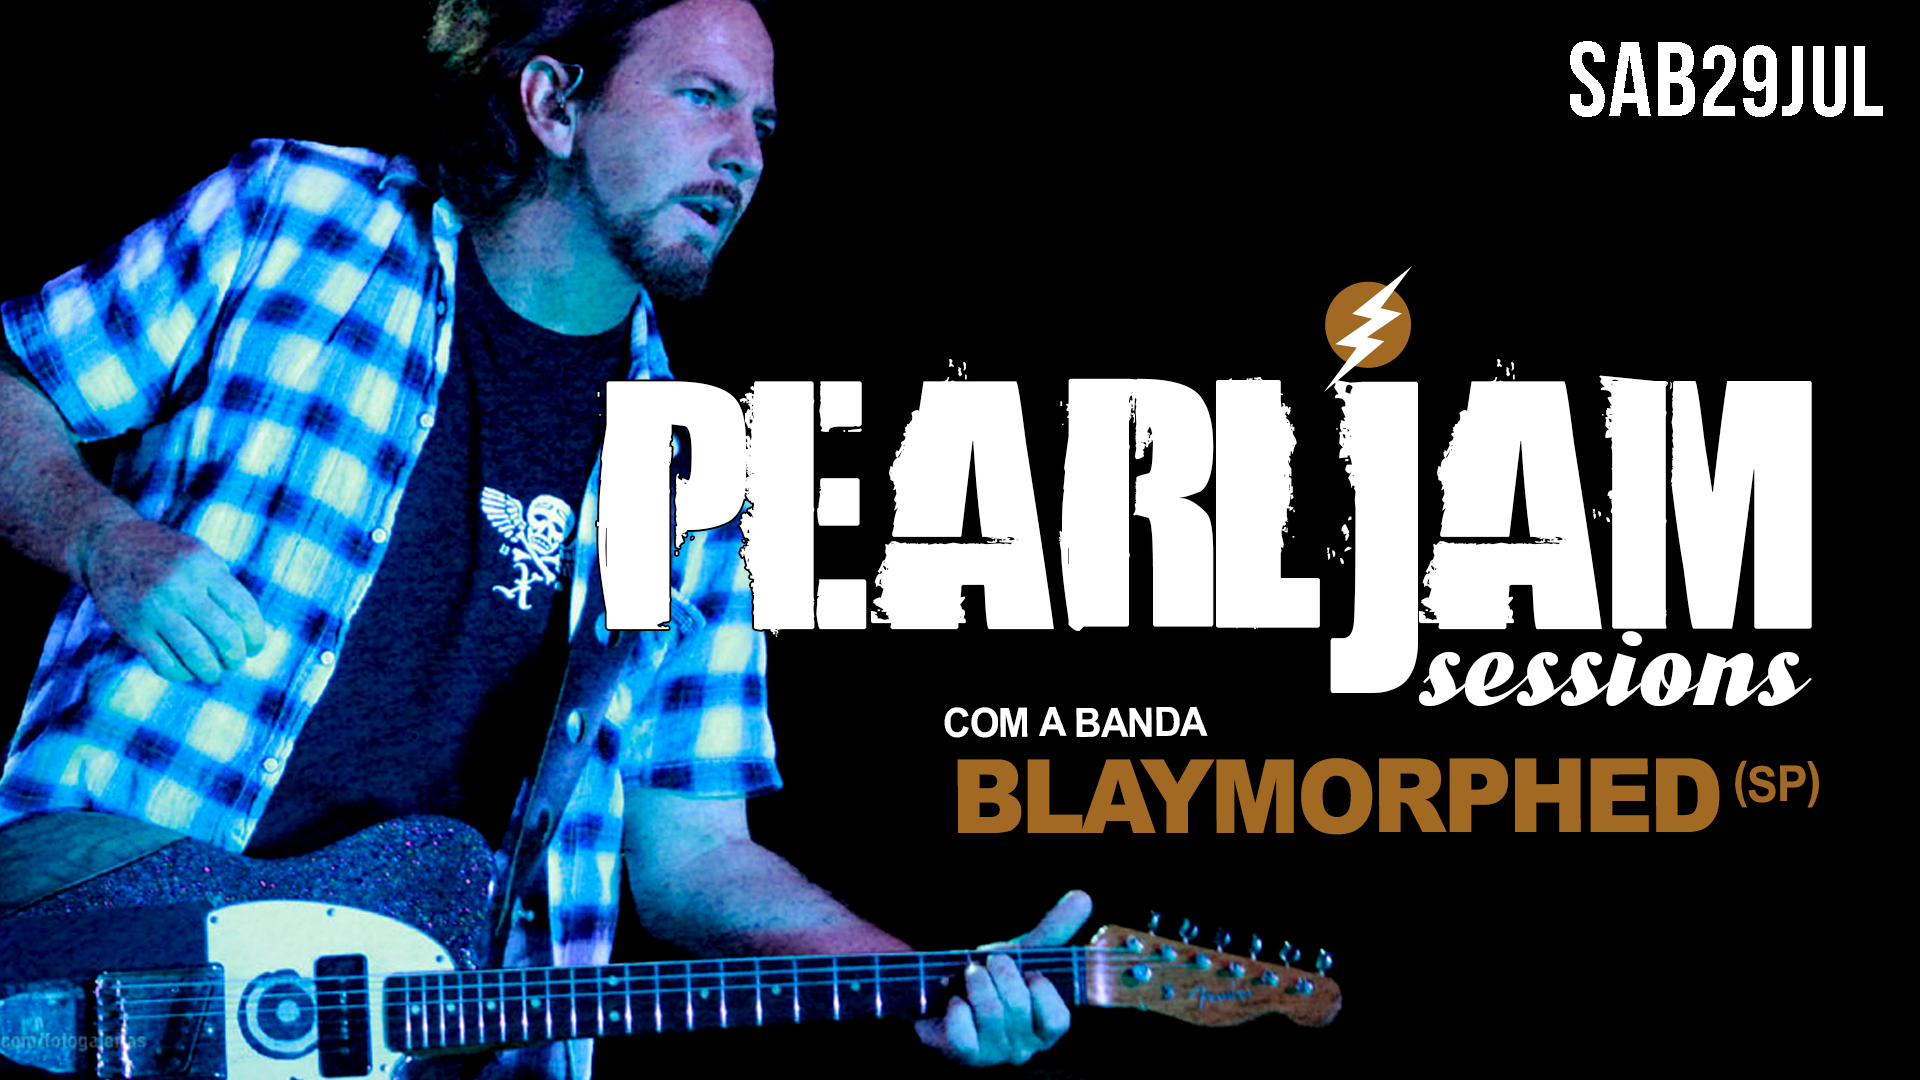 Sunday - Pearl Jam Sessions : Blaymorphed (SP)